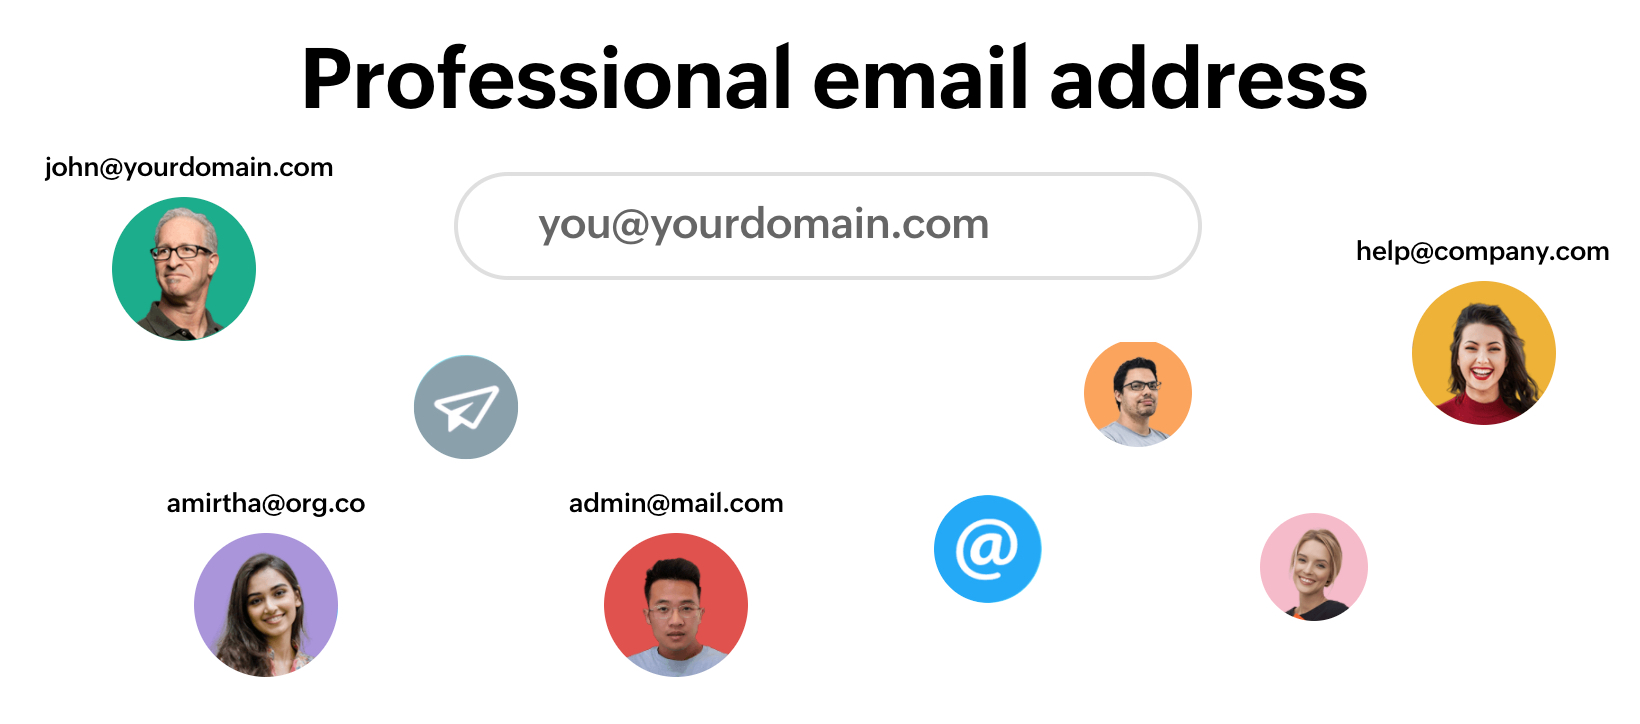 What is the best professional email address?